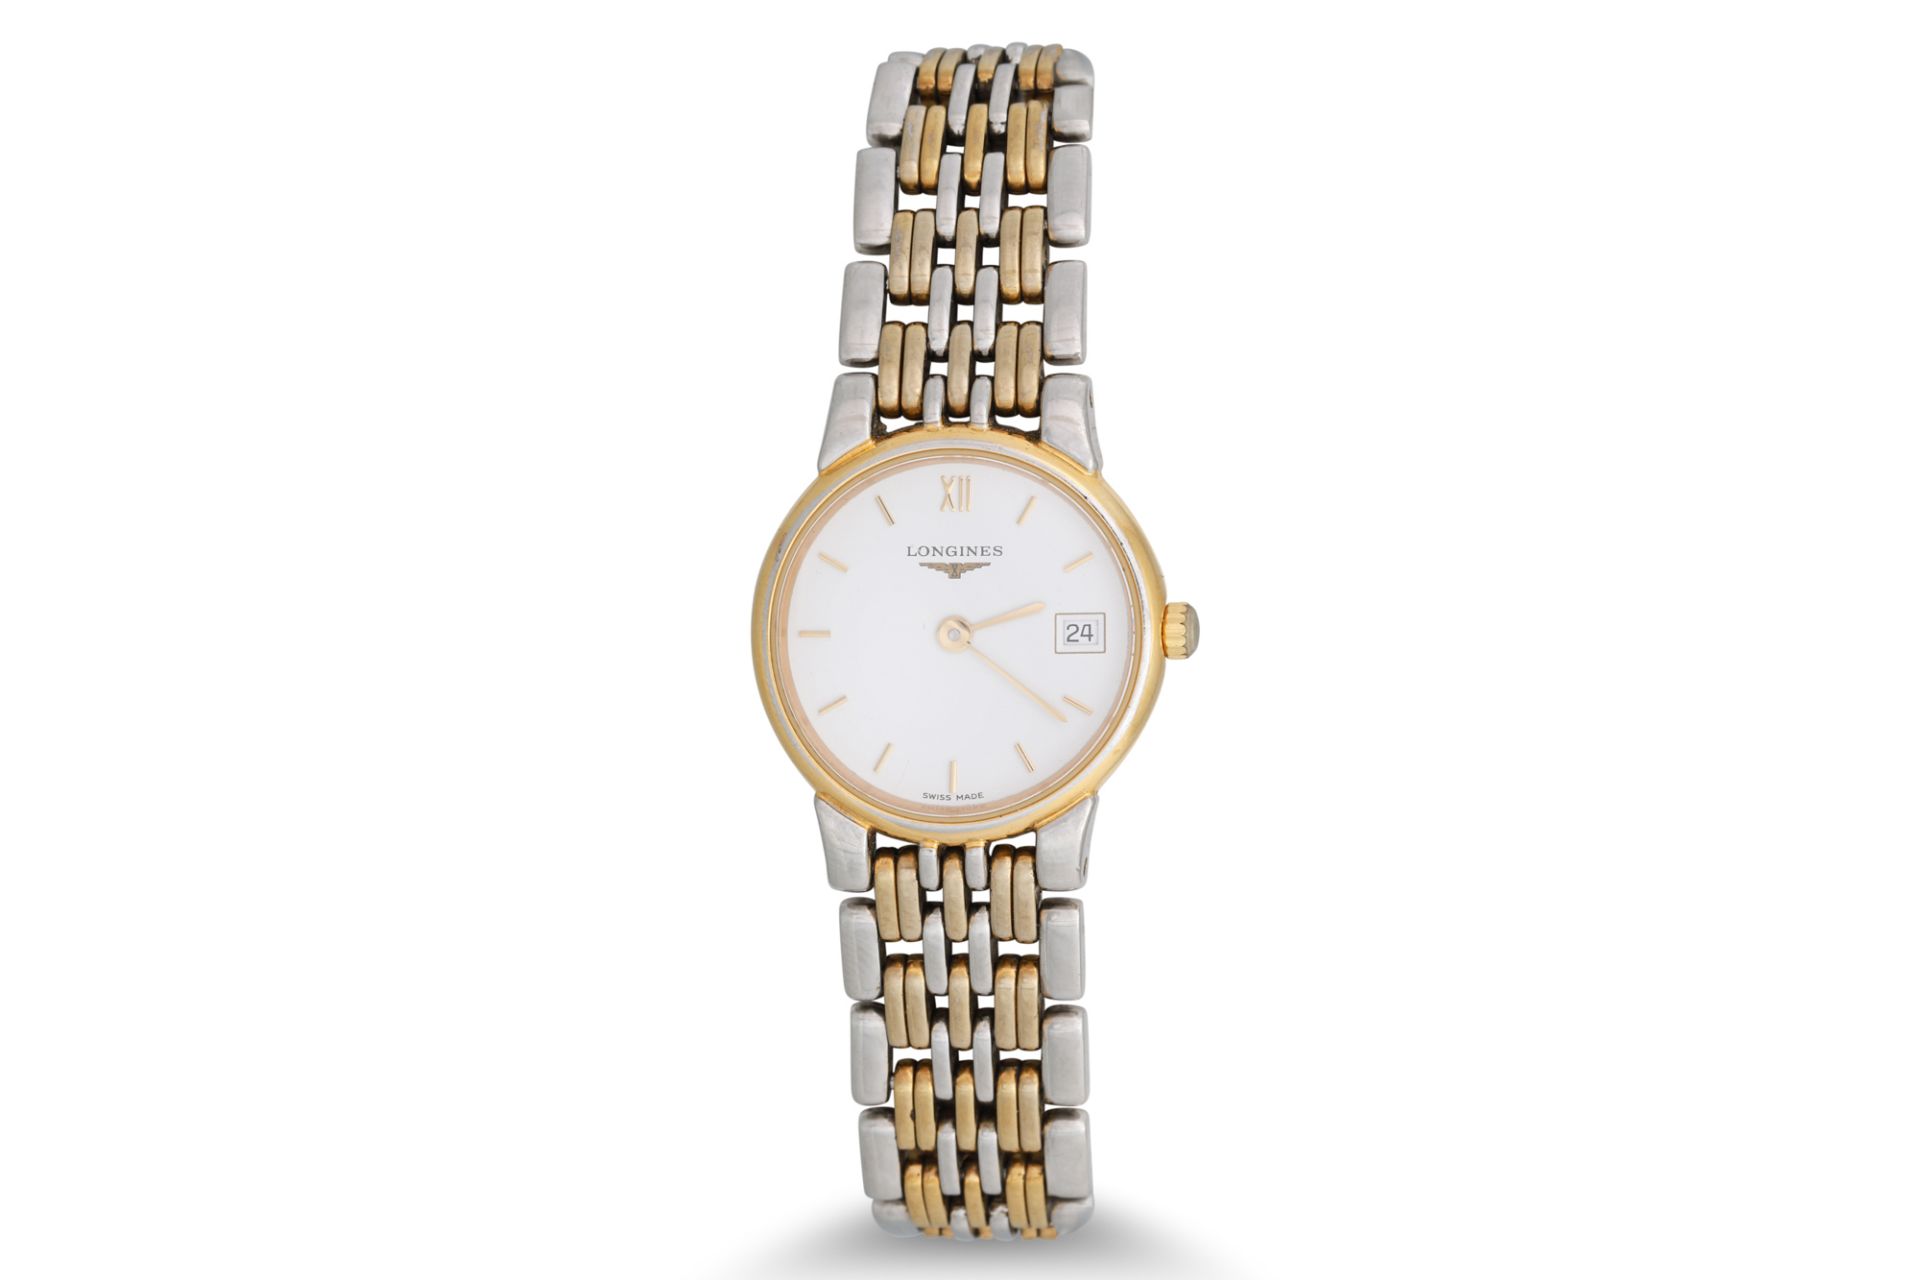 A LADY'S LONGINES STAINLESS STEEL WRISTWATCH, two colour gold, white face, baton markers with date